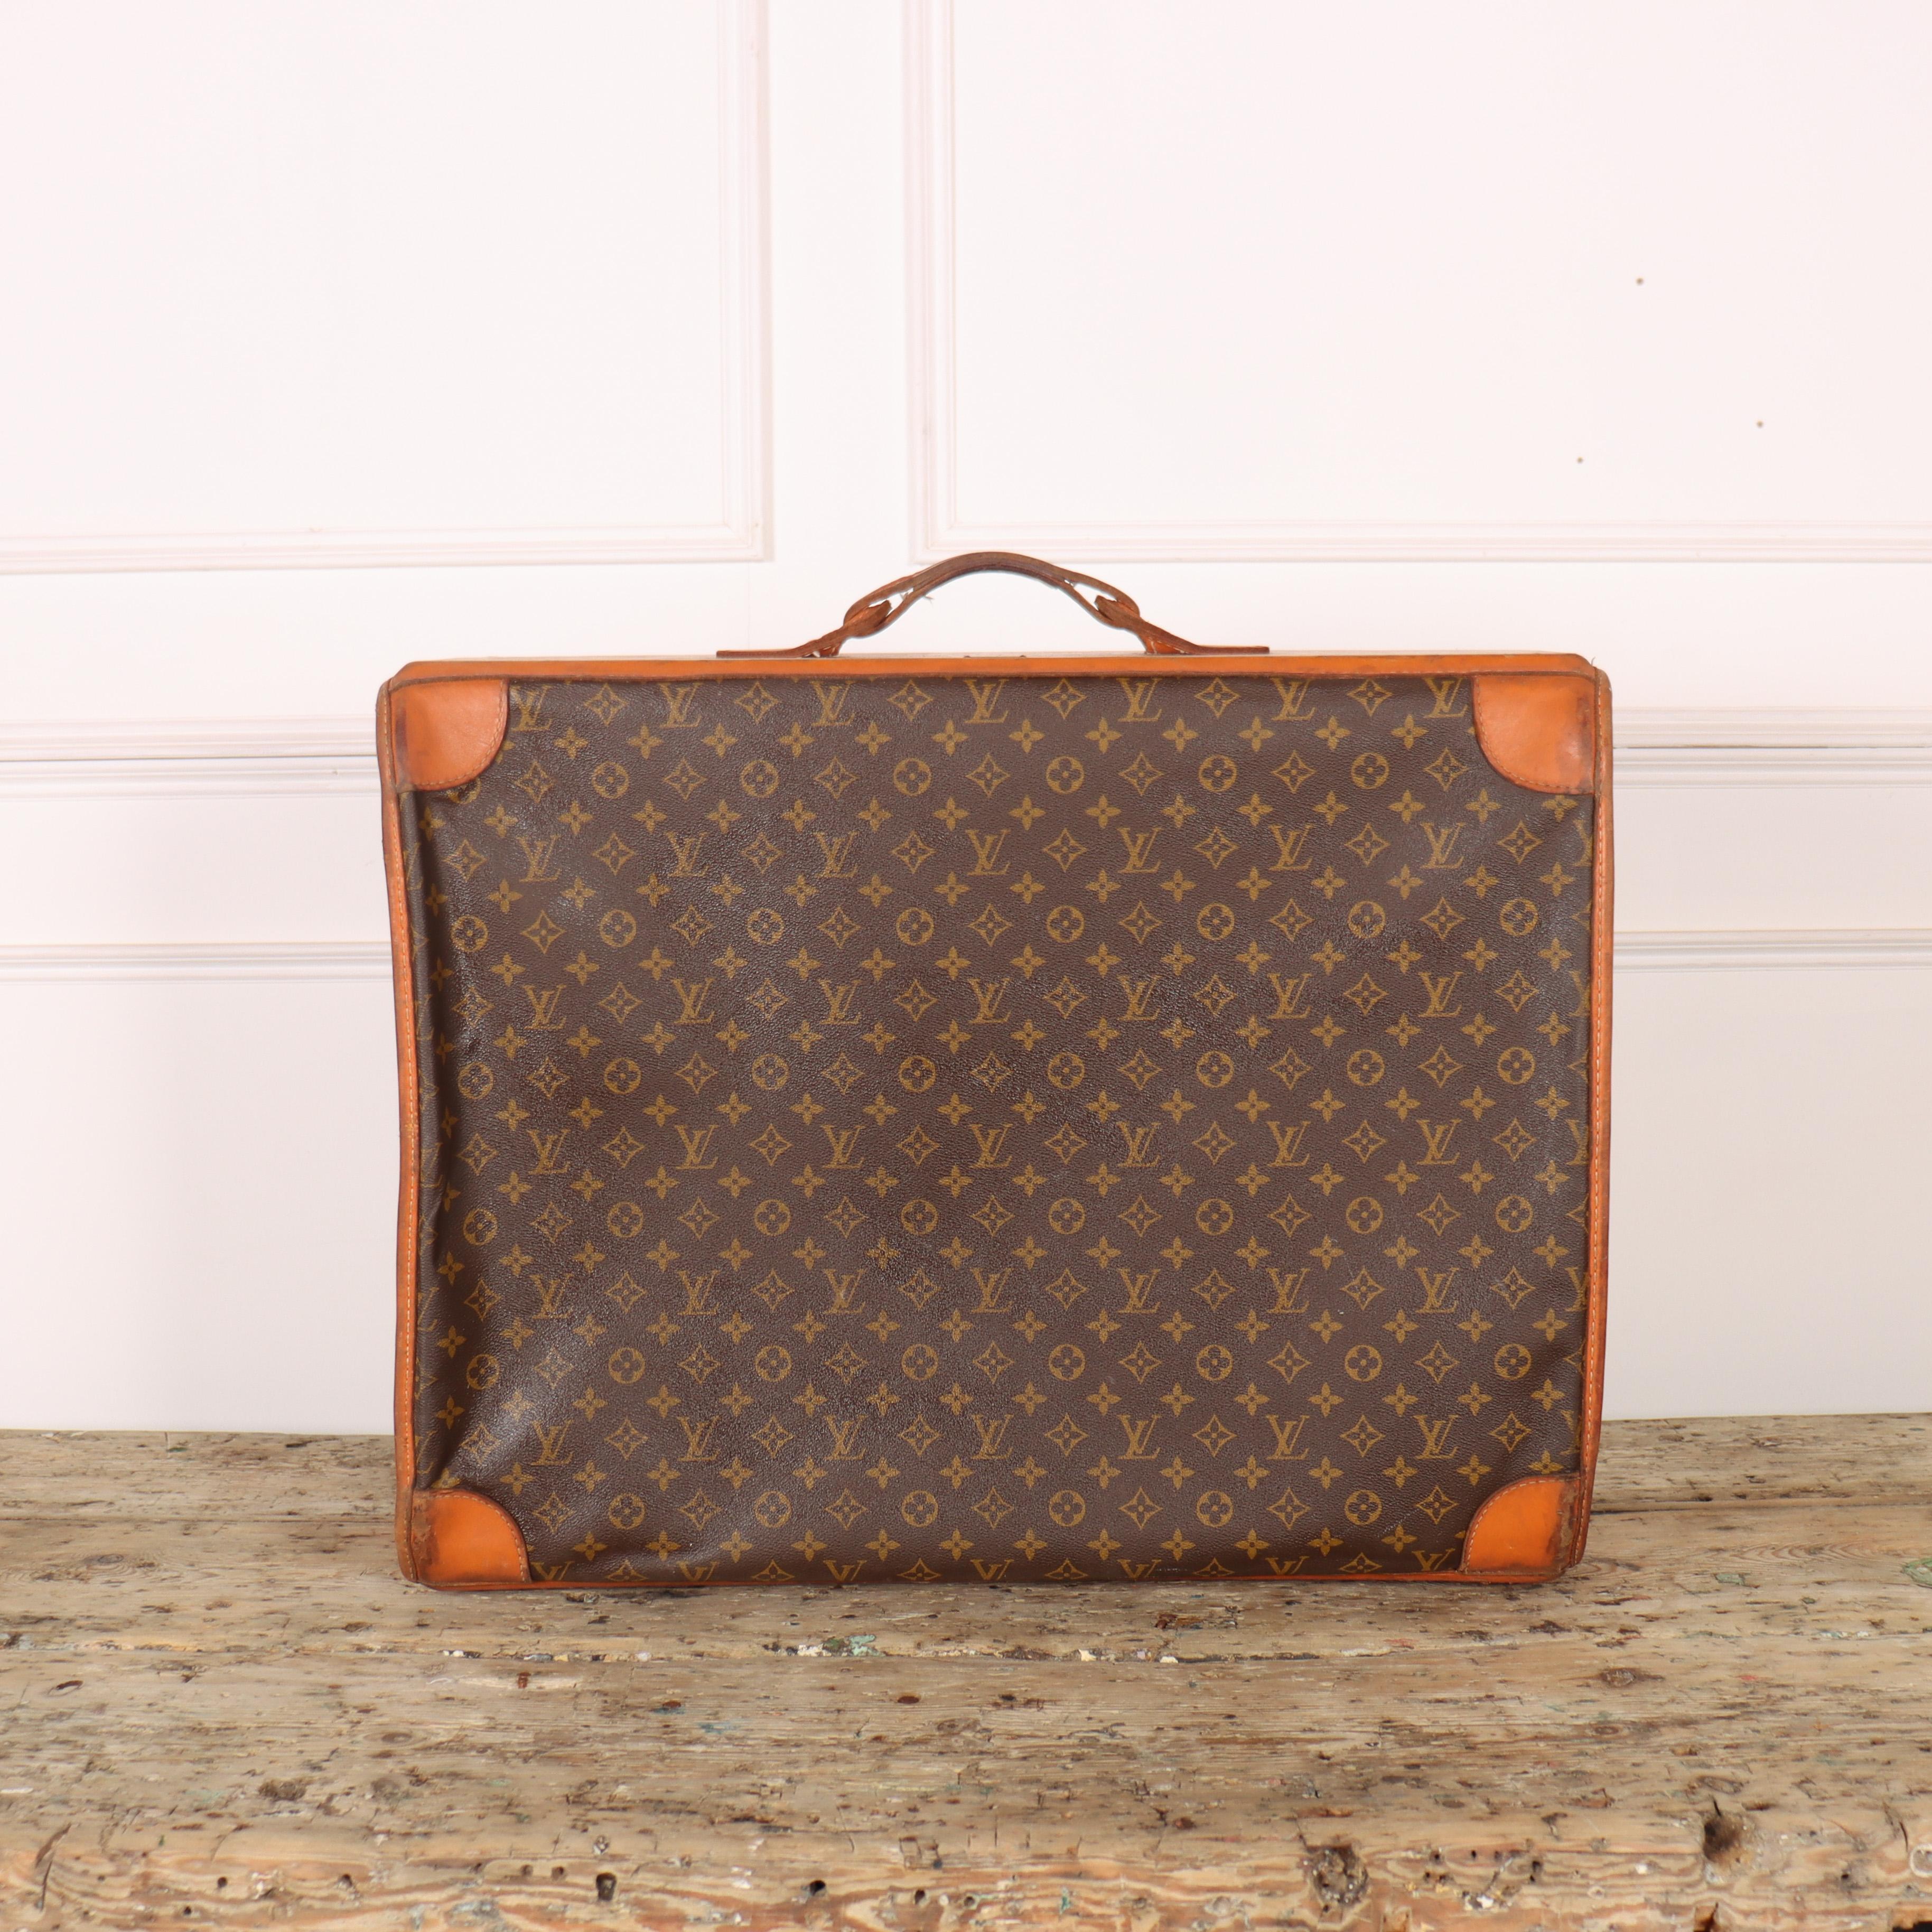 20th C Louis Vuitton leather suitcase. 1970.

Reference: 7939

Dimensions
25.5 inches (65 cms) Wide
20 inches (51 cms) Deep
9 inches (23 cms) High